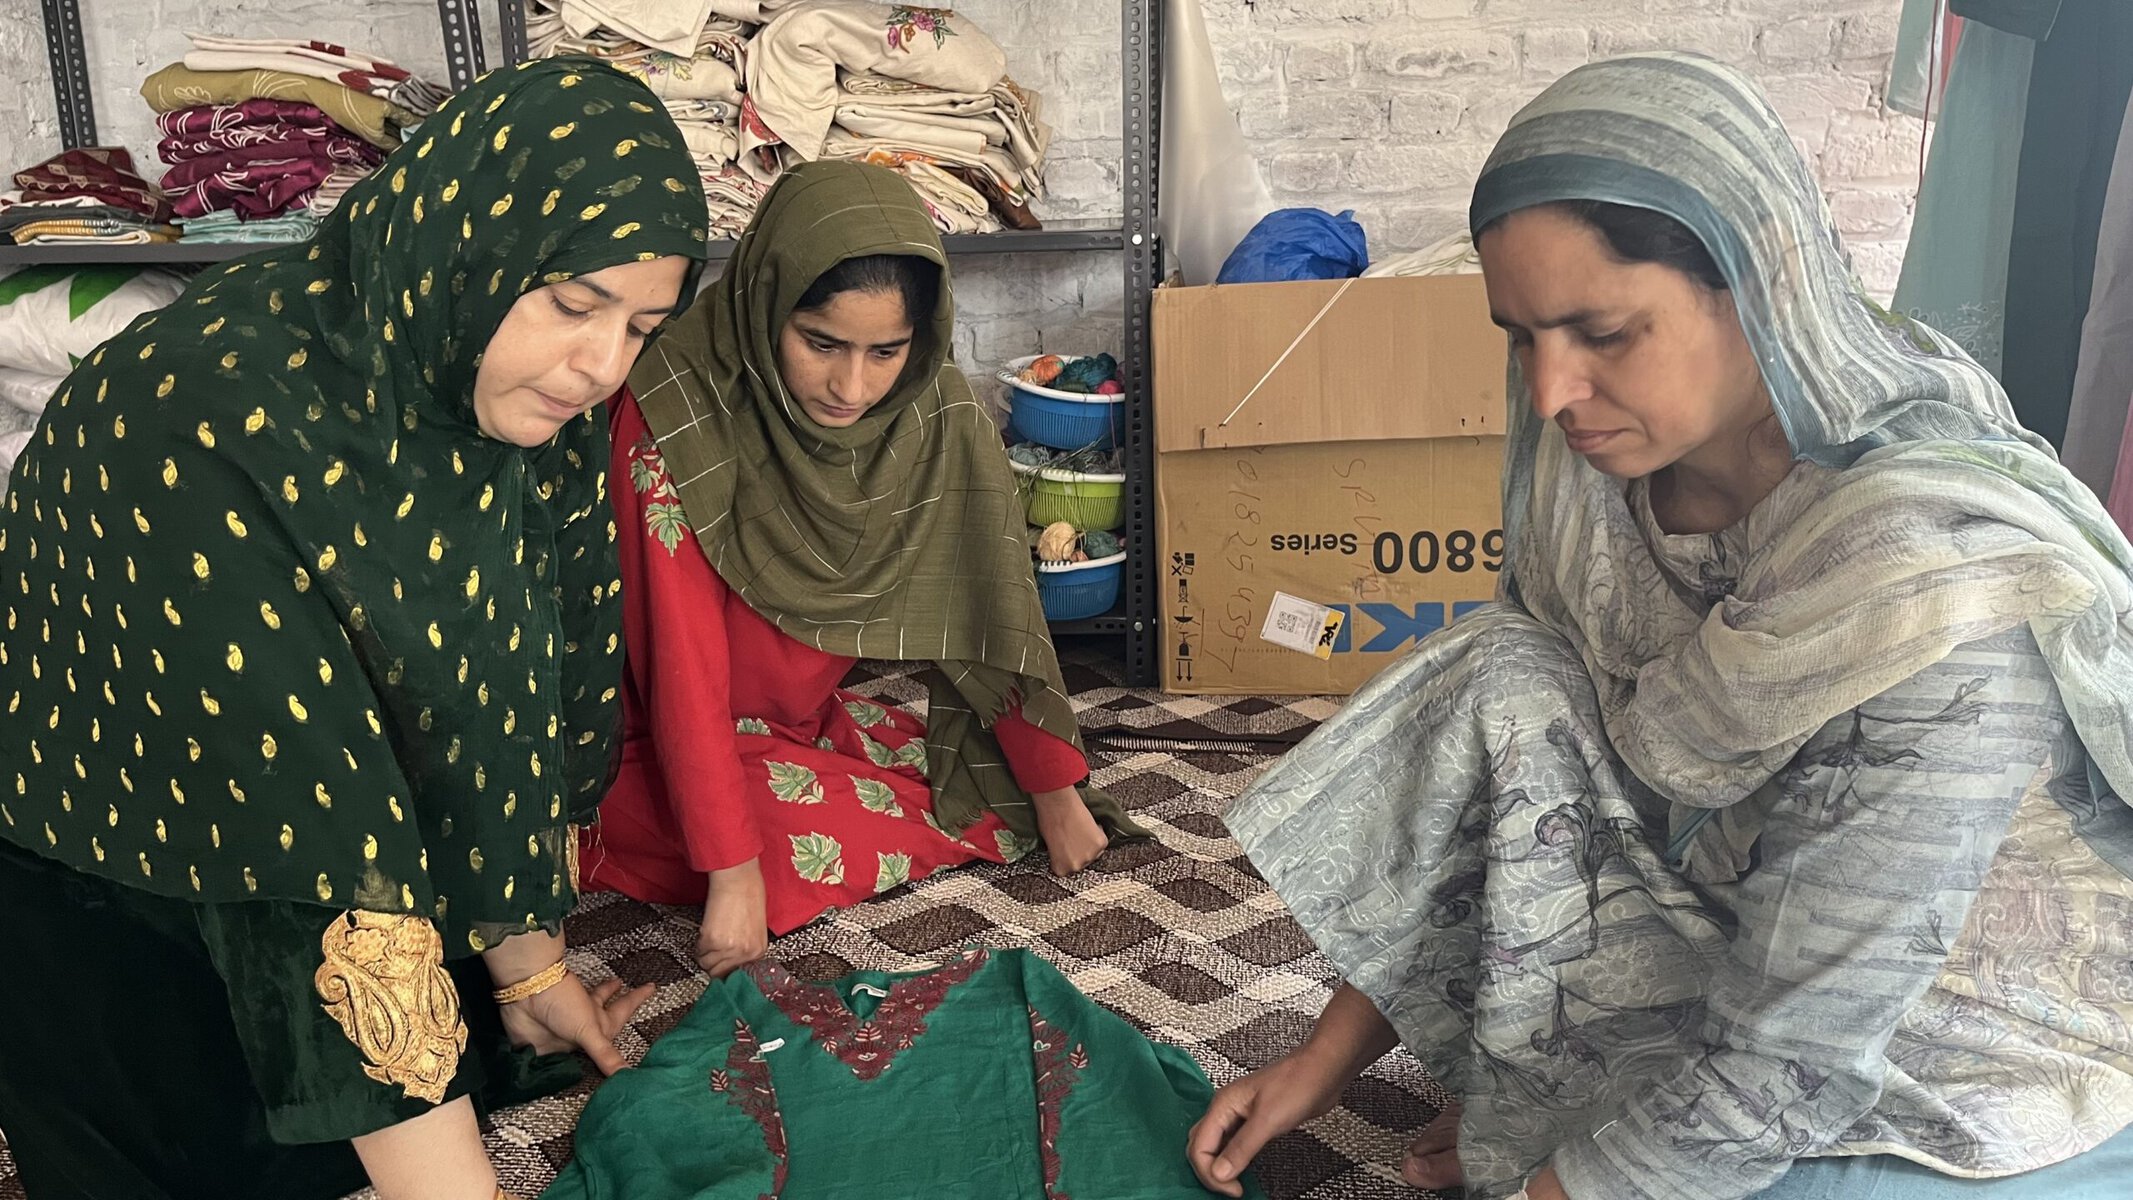 Masrat Jan (right) inspects an embroidered garment in the Noorari workshop.